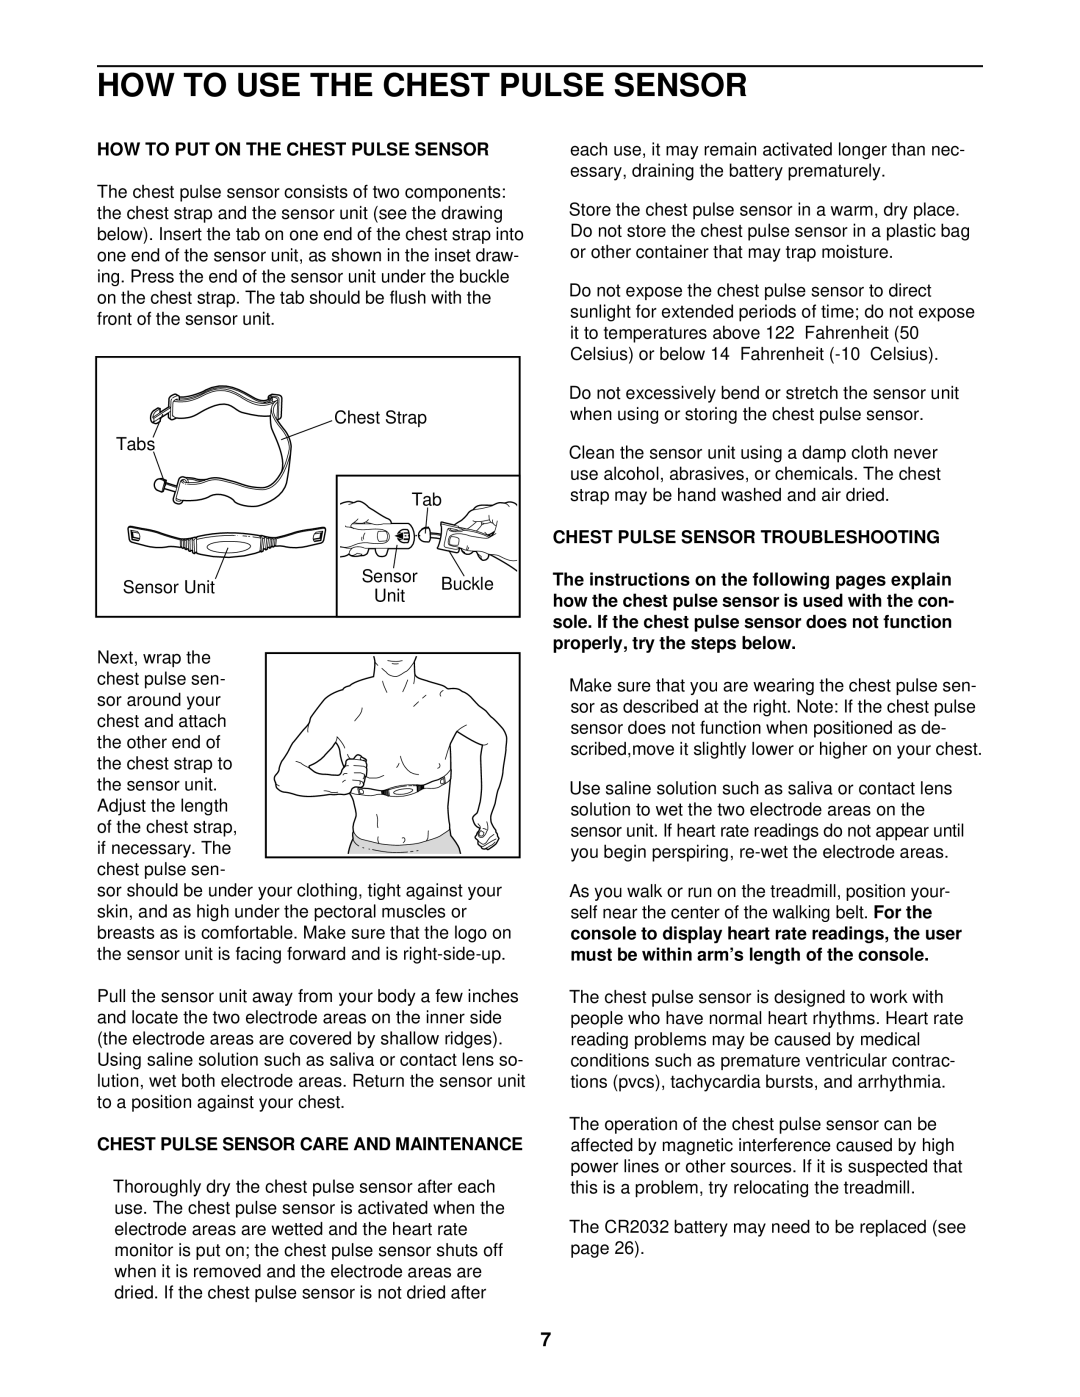 ProForm PFTL14920 user manual HOW to USE the Chest Pulse Sensor, HOW to PUT on the Chest Pulse Sensor 